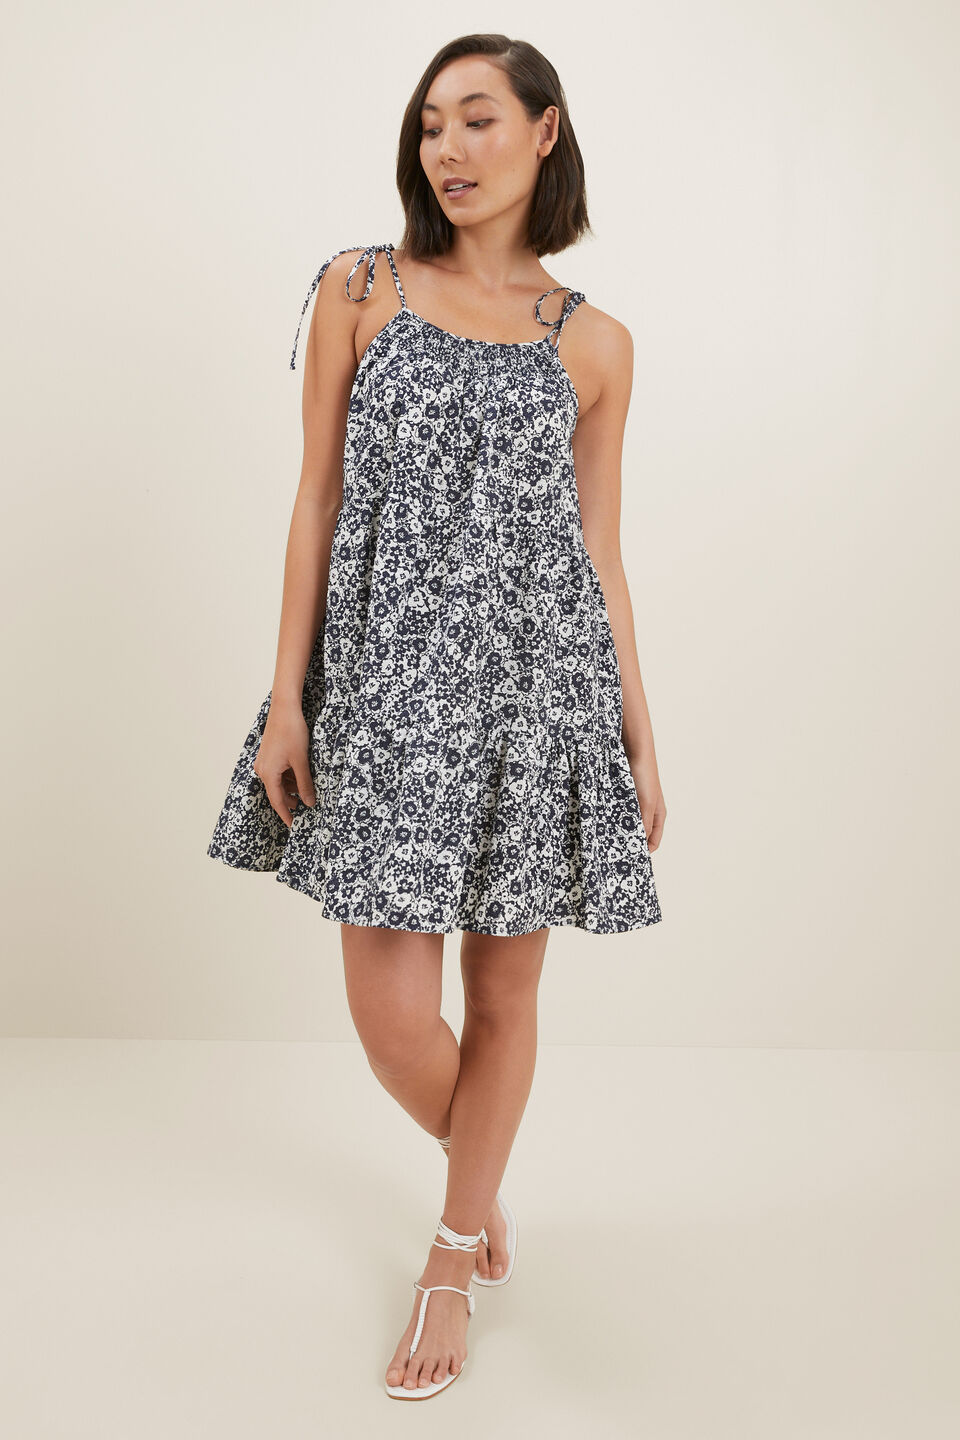 Retro Floral Tiered Mini Dress  Deep Navy Floral